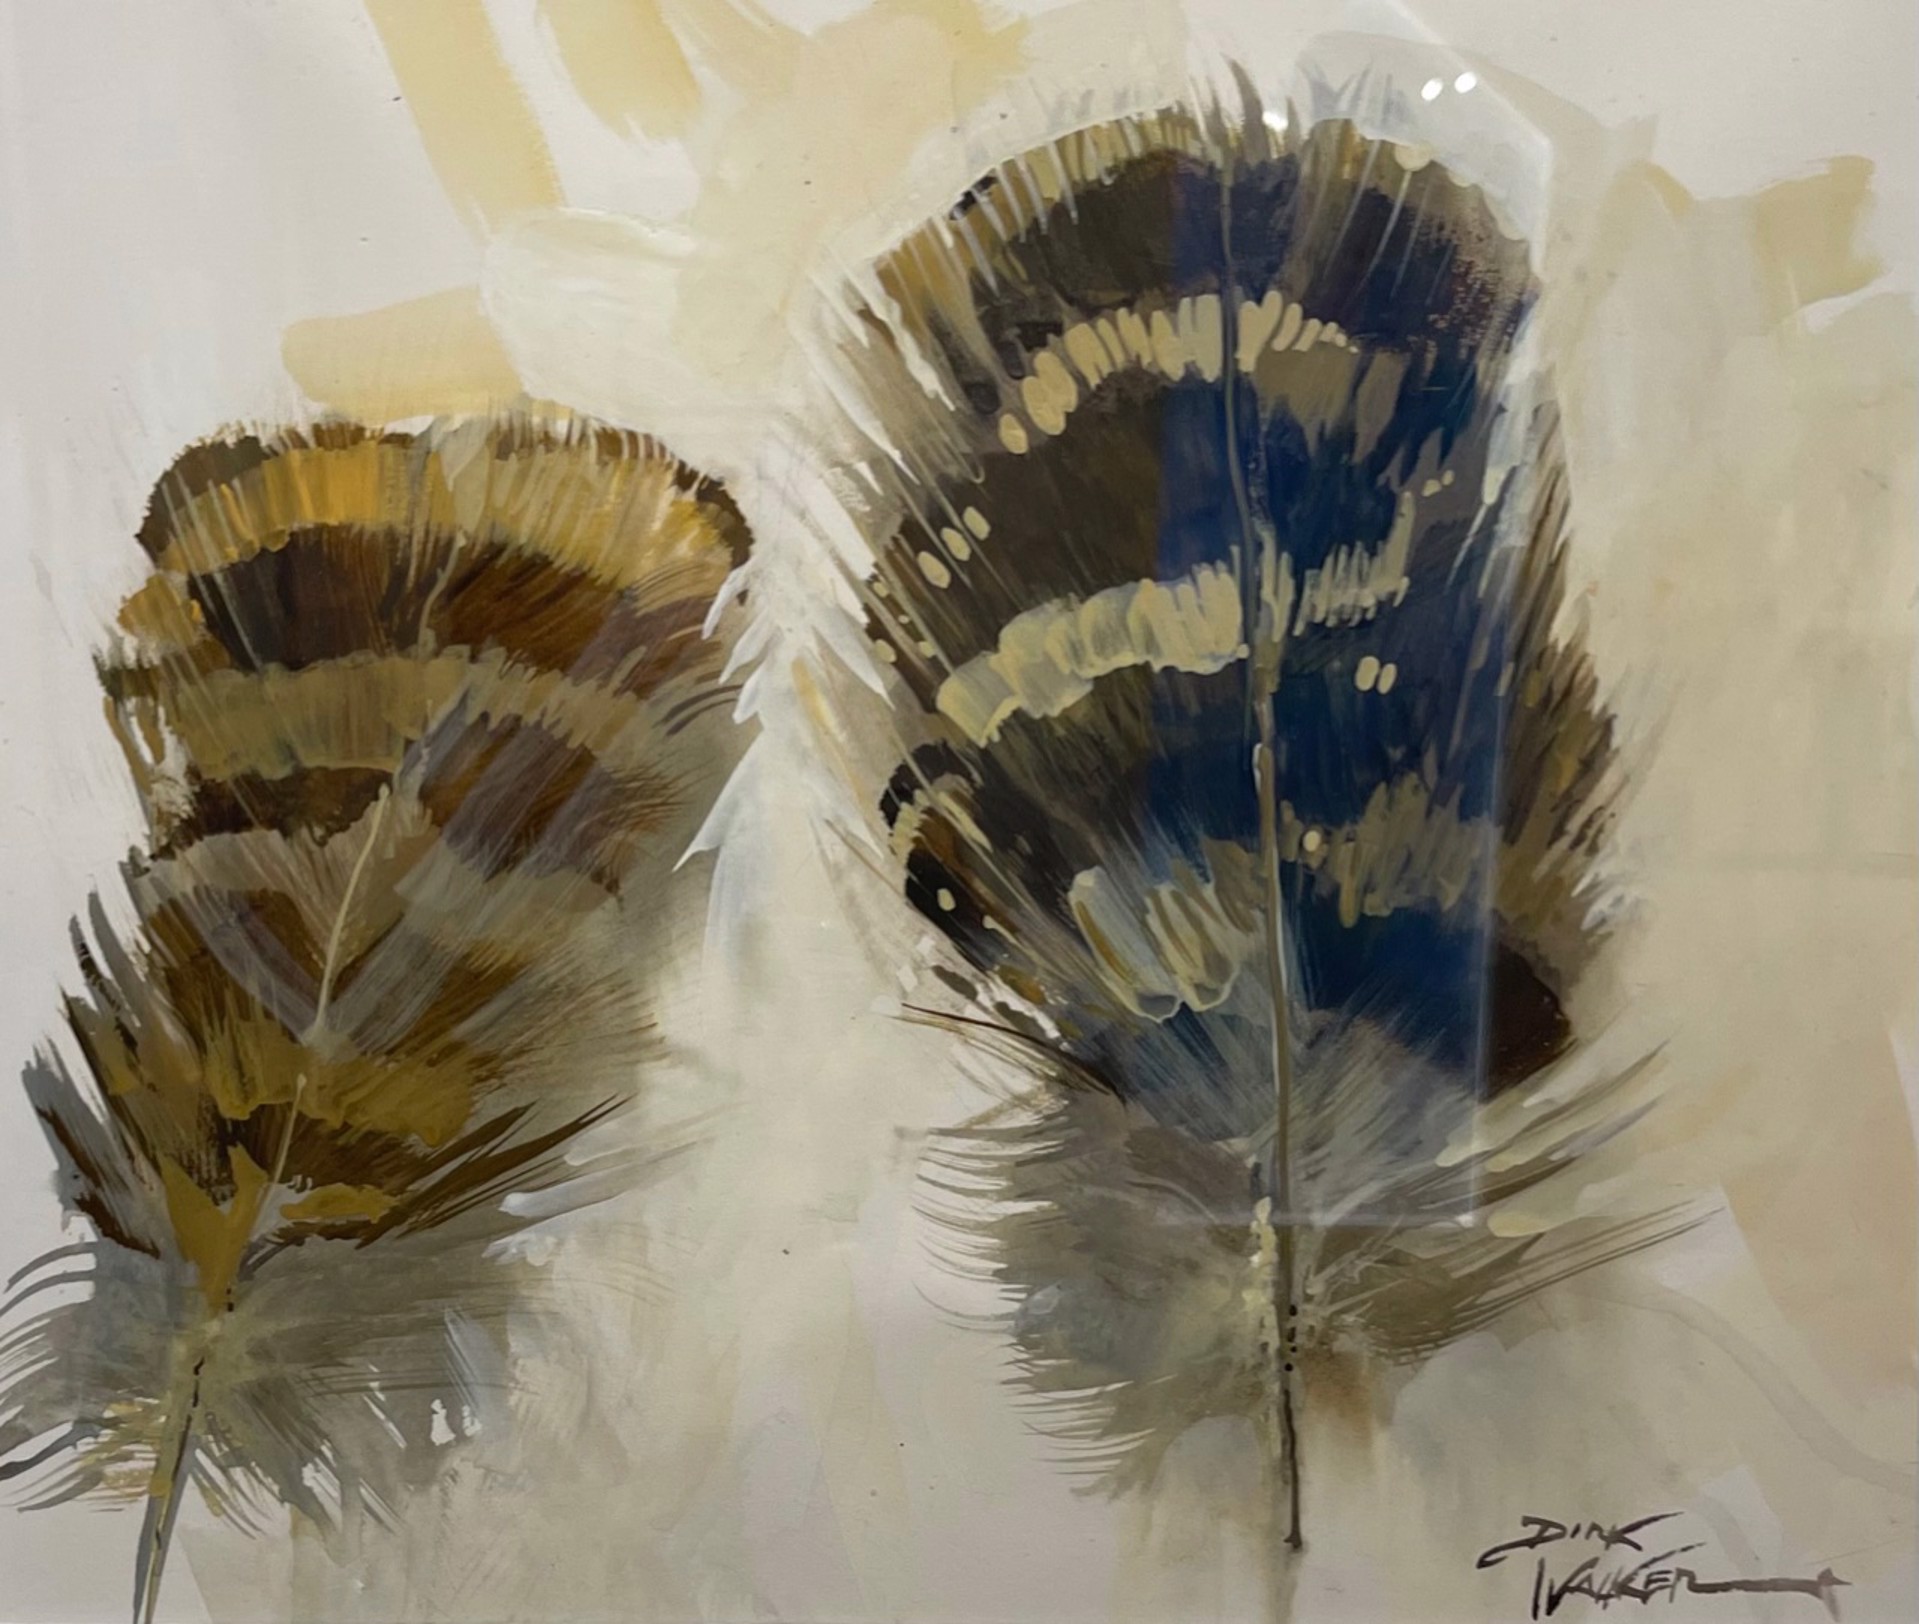 Pair of Grouse Feathers by Dirk Walker